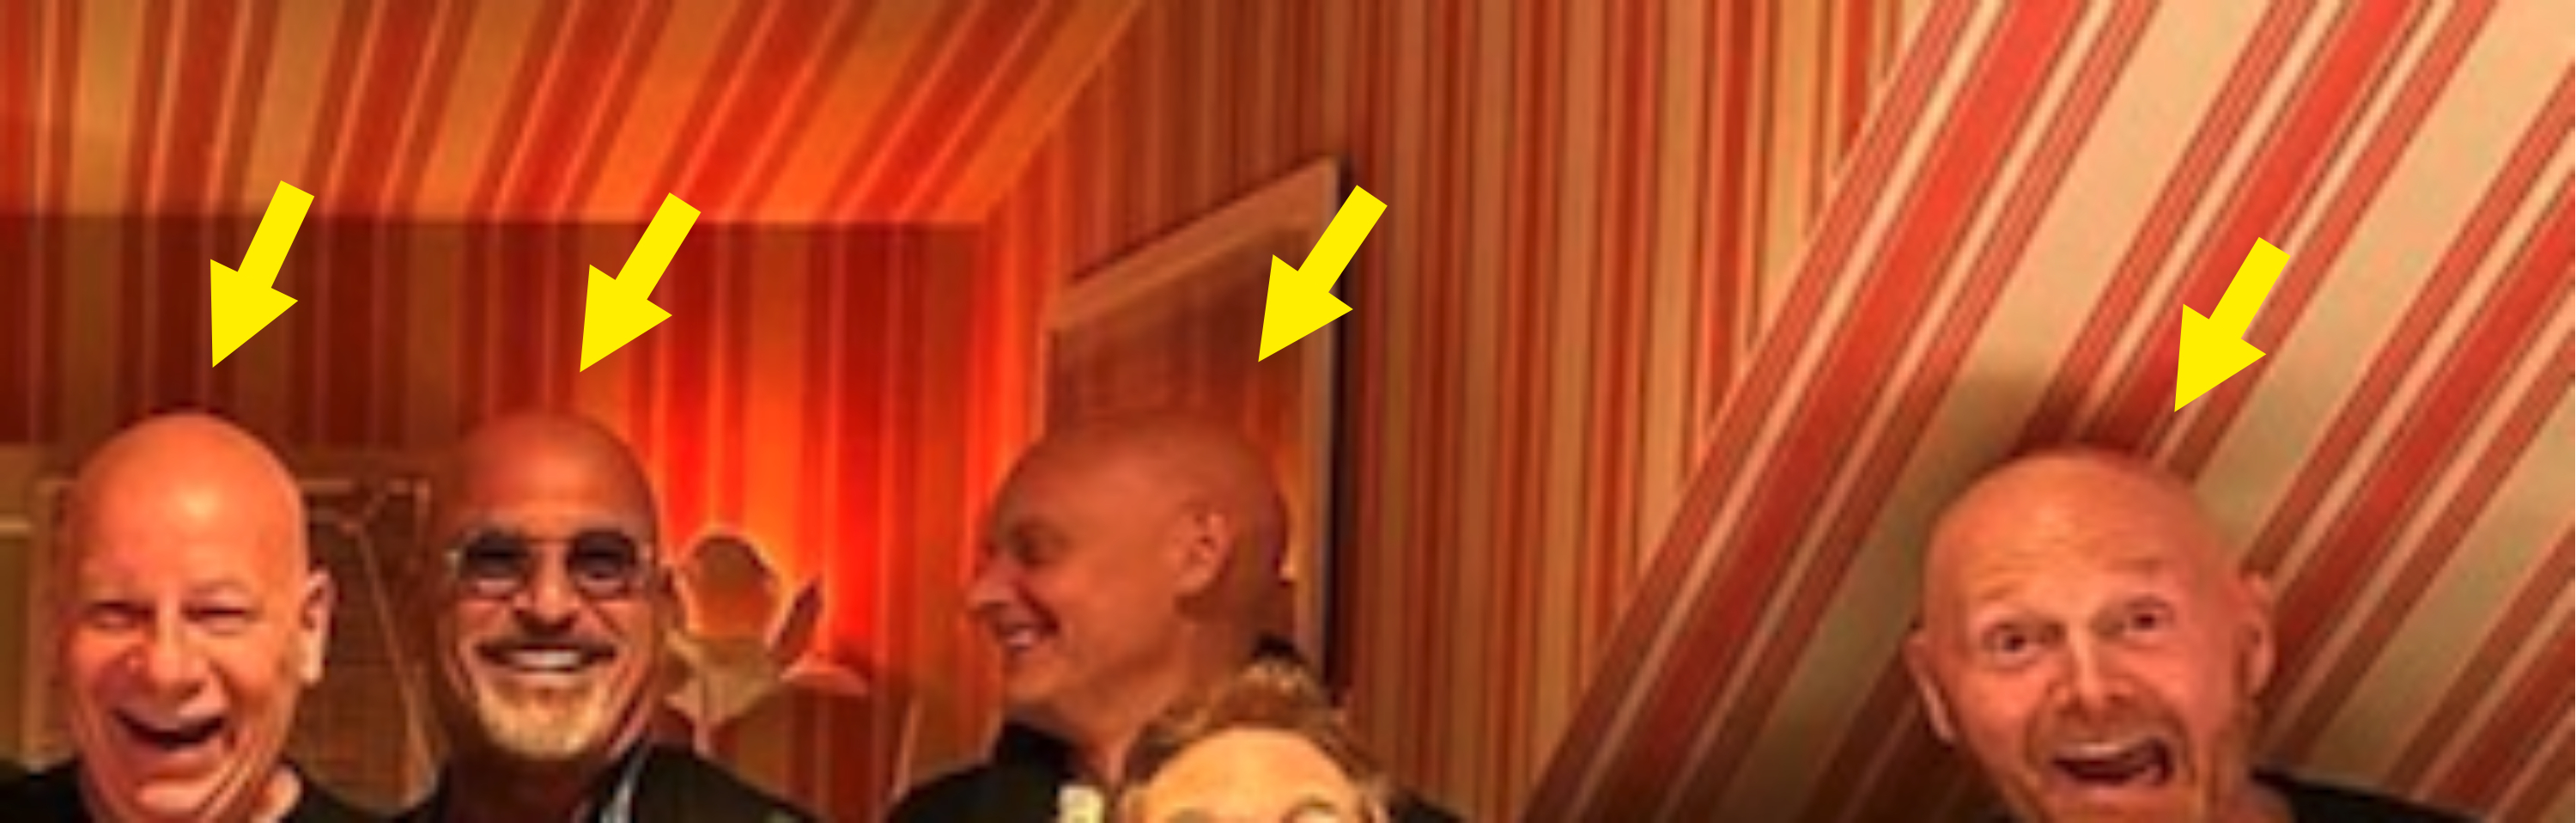 Arrows pointing to Jeff, Howie, Paul Vincent, and Bill laughing